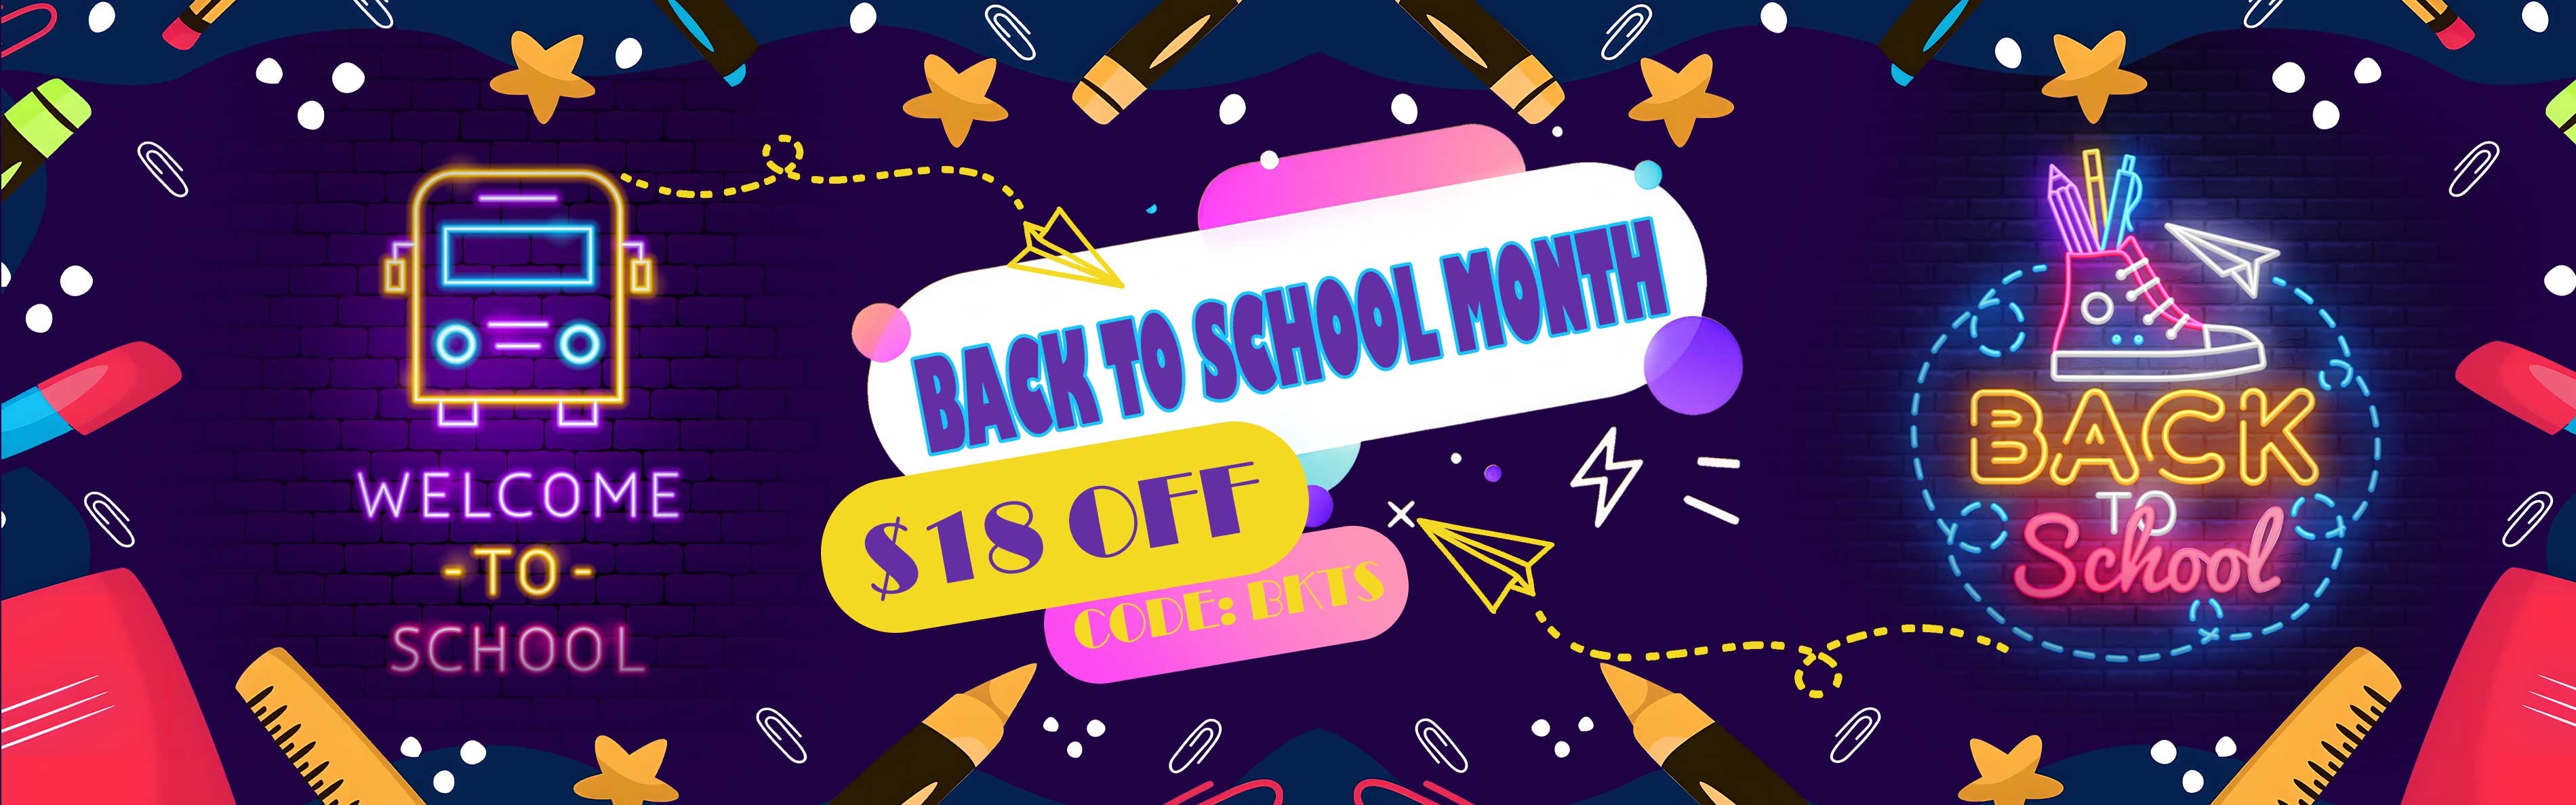 Back to School Month Sale